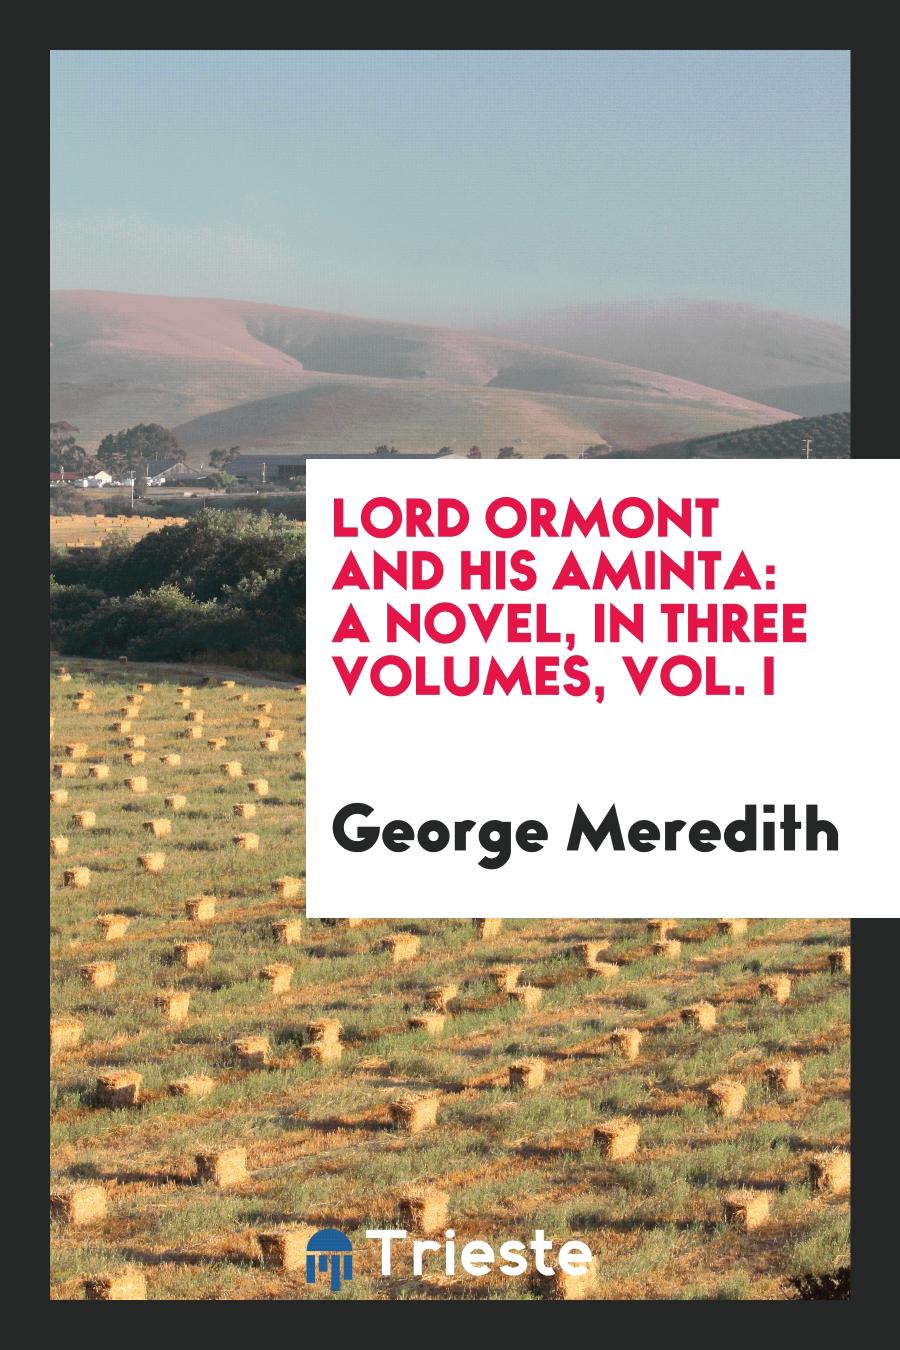 Lord Ormont and His Aminta: A Novel, in Three Volumes, Vol. I